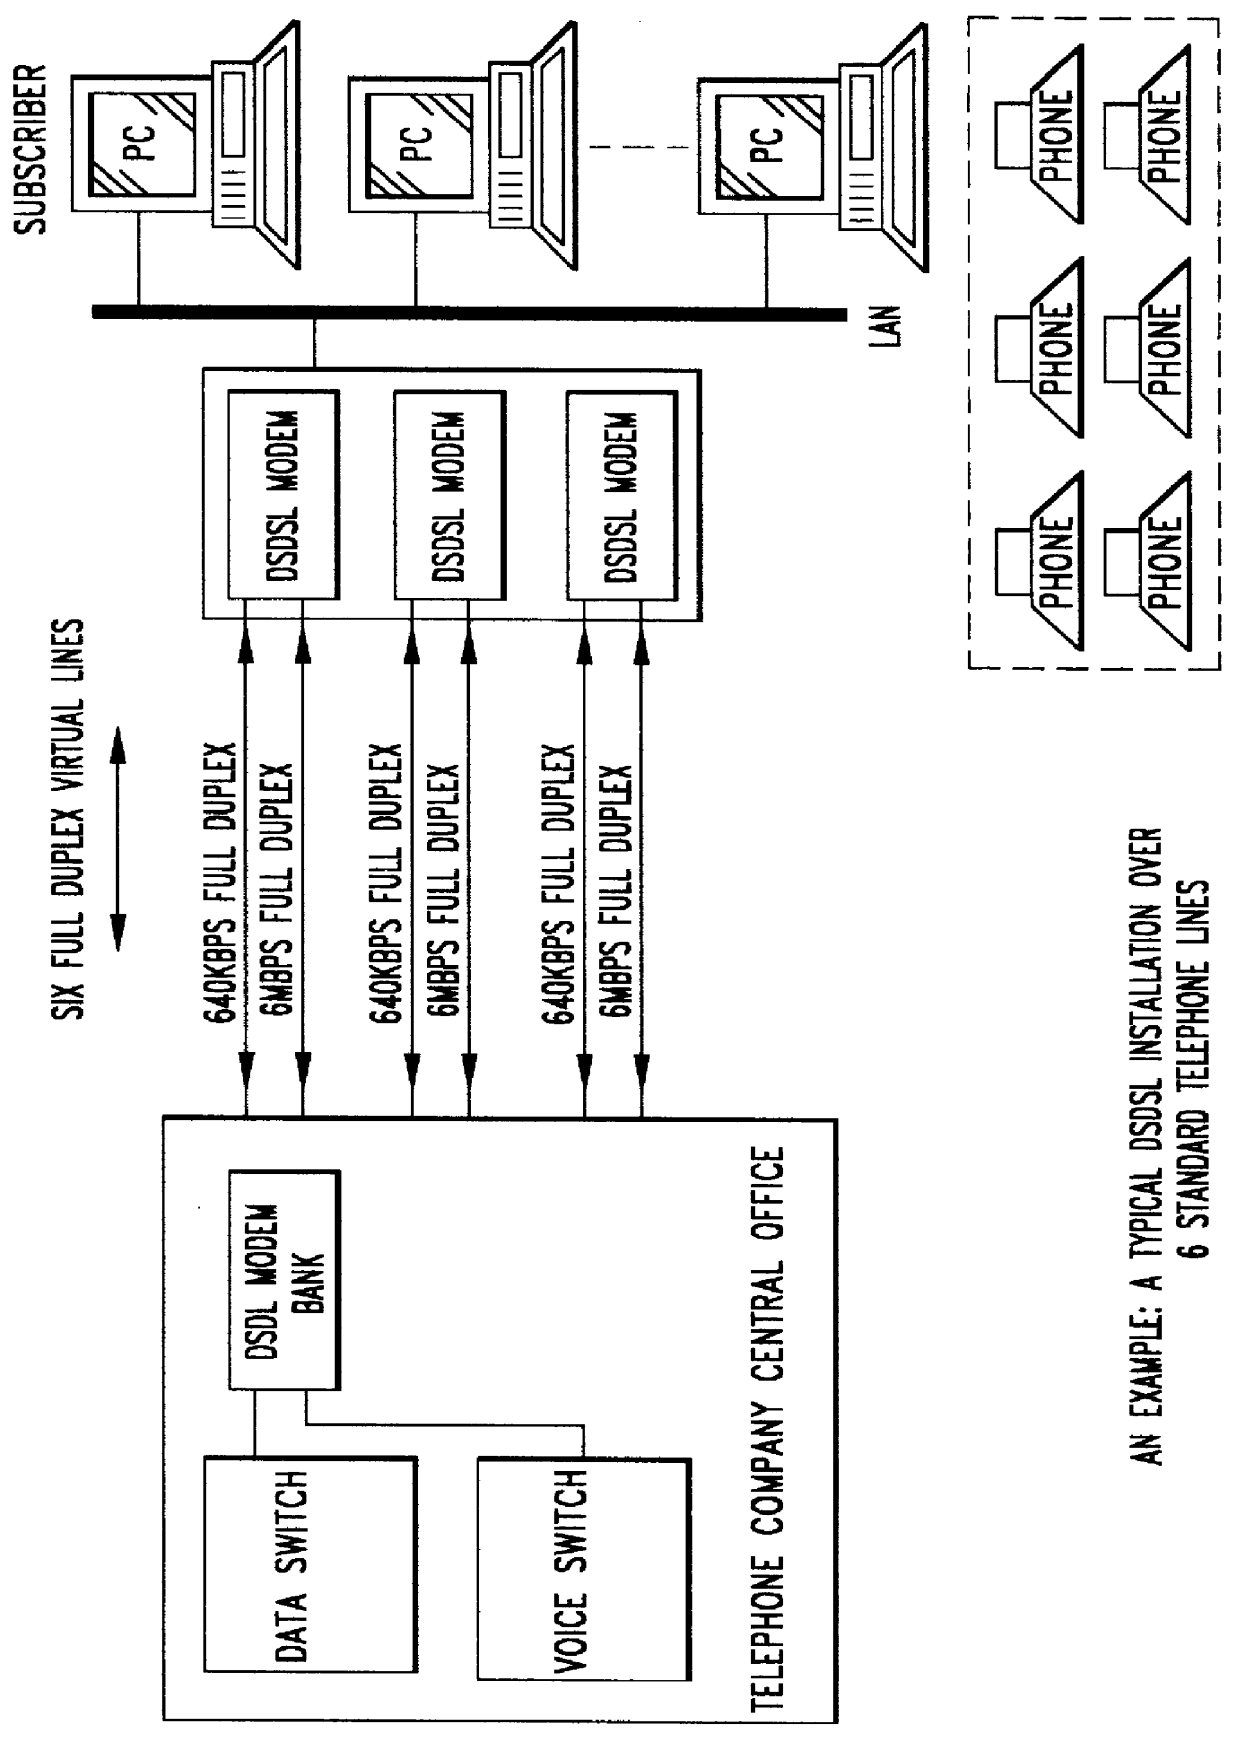 Method of and system architecture for high speed dual symmetric full duplex operation of asymmetric digital subscriber lines